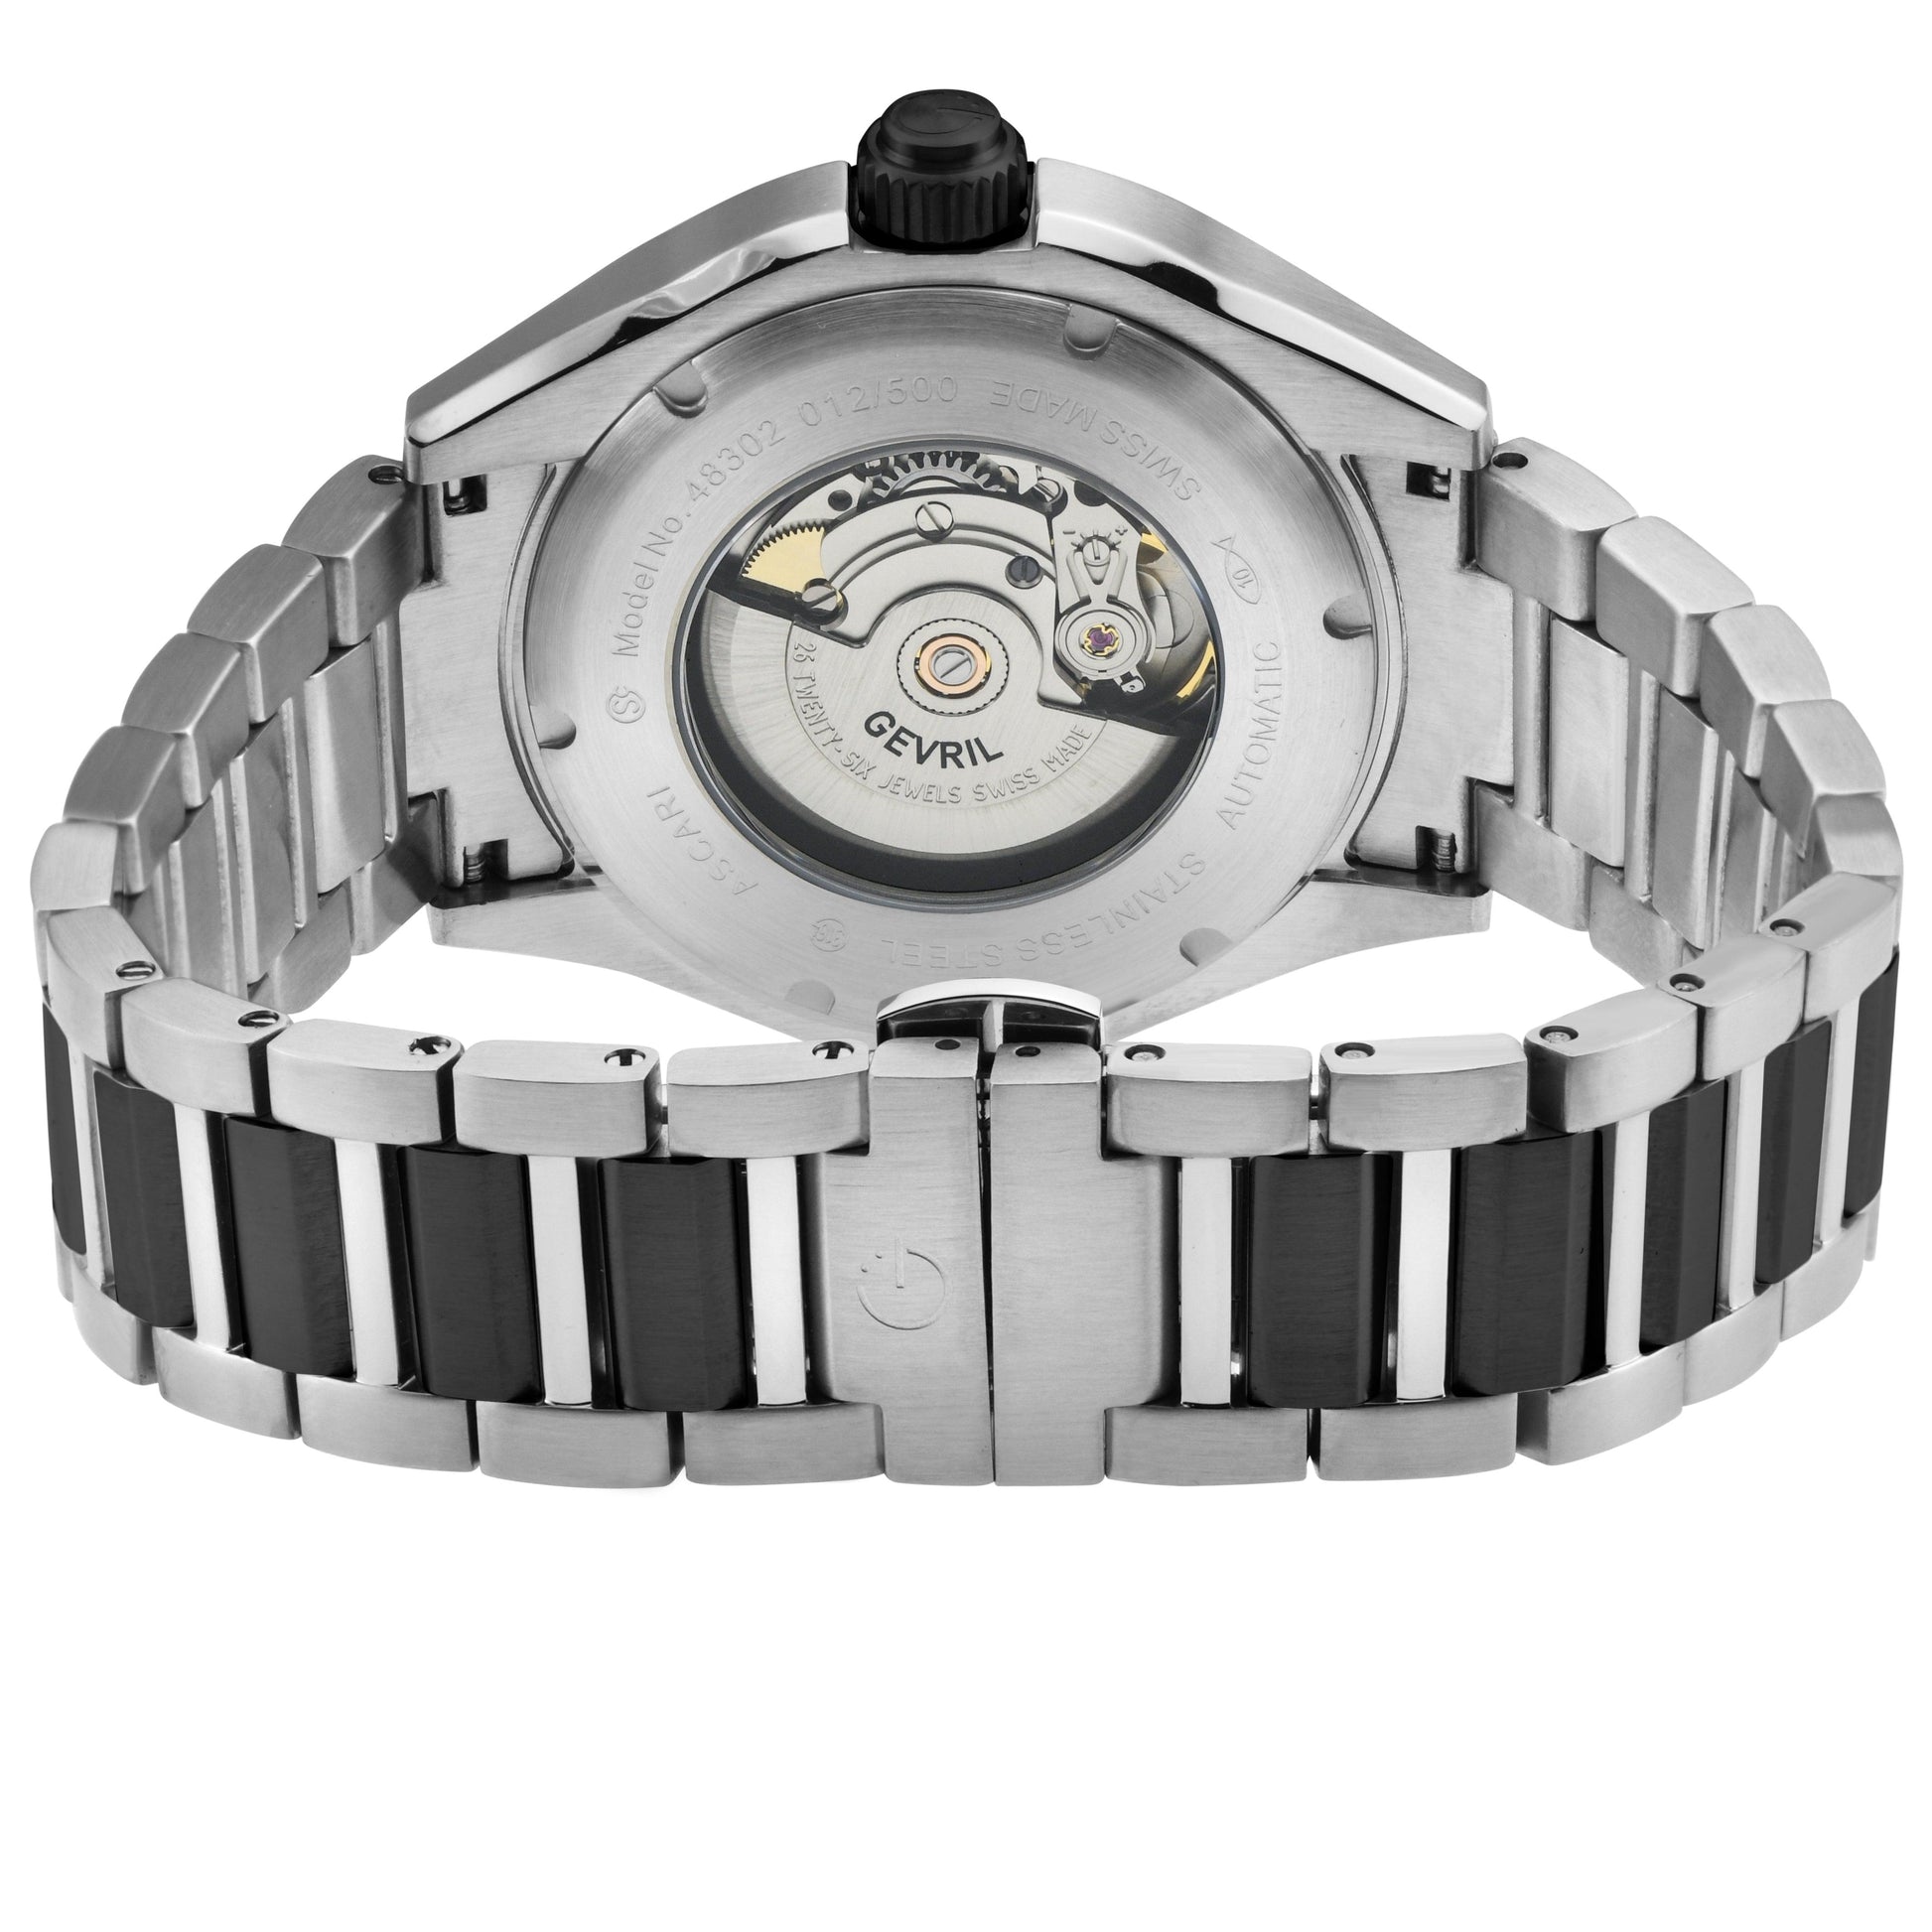 Gevril-Luxury-Swiss-Watches-Gevril Ascari-48302B